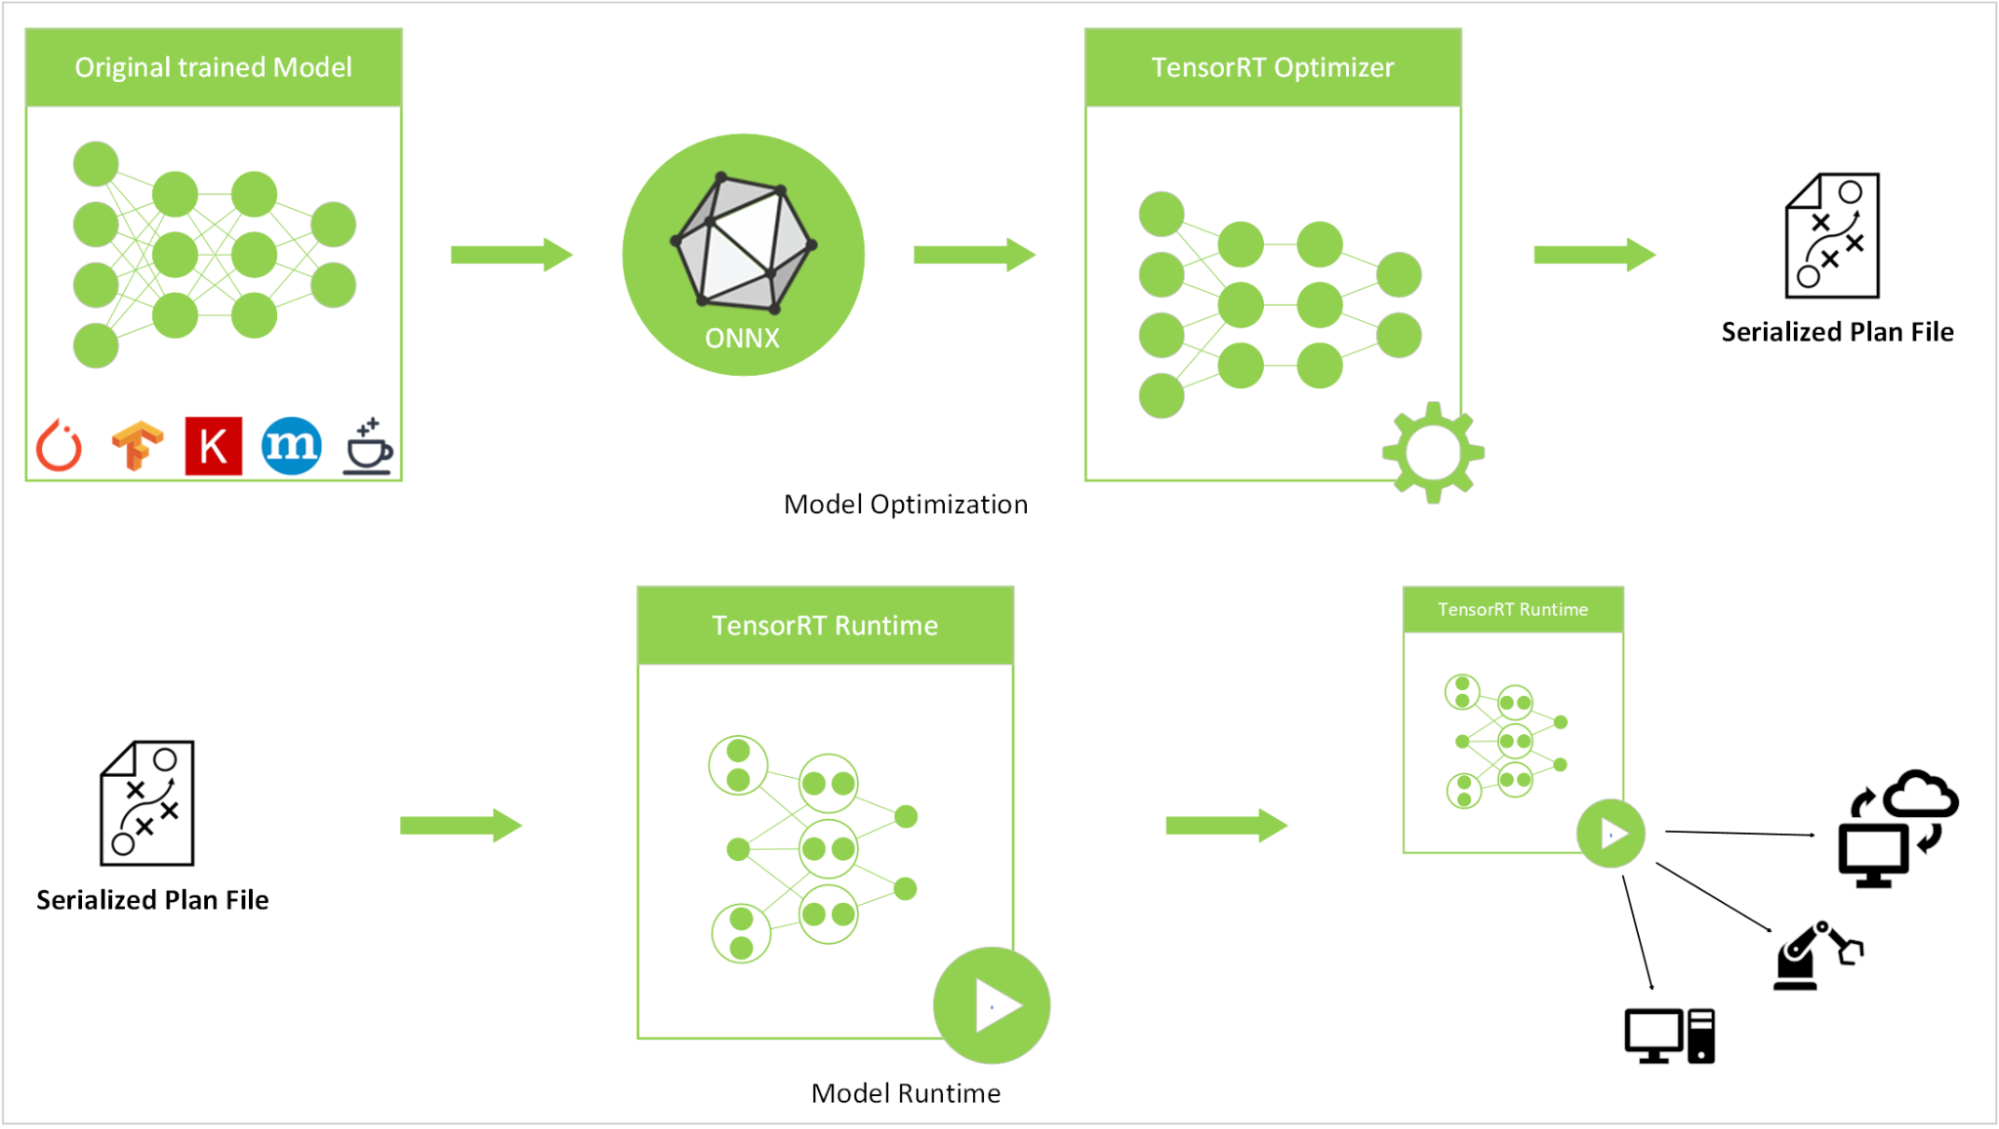 The diagram shows model optimization using ONNX and TensorRT Optimizer and then model inference using NVIDIA TensorRT runtime in a deployment environment. 